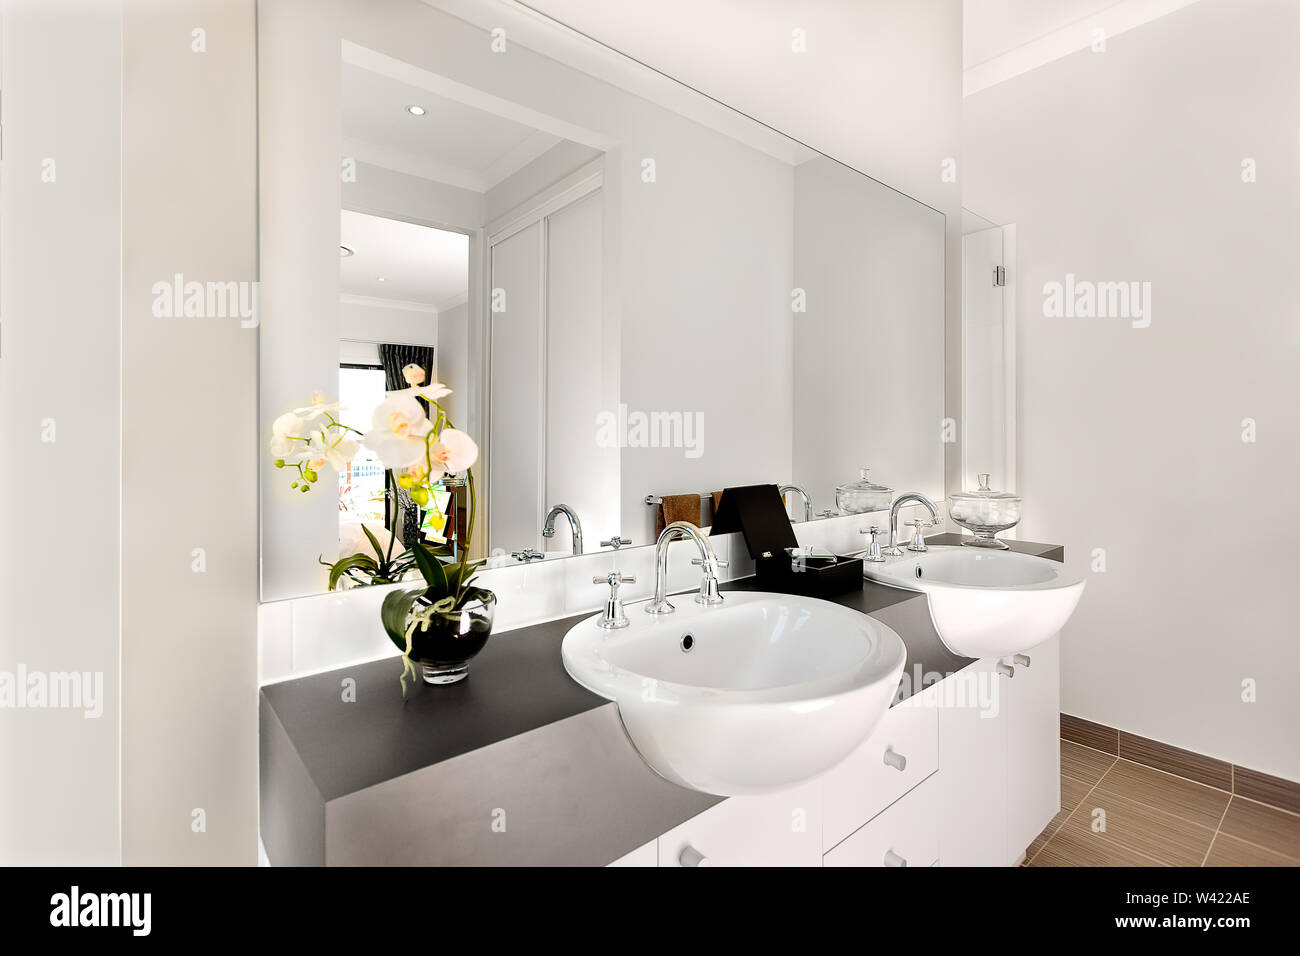 Luxurious washroom included two shiny white washstand made of ceramic, there are silver and curved faucet fixed to sink. The taps can give warm water. Stock Photo